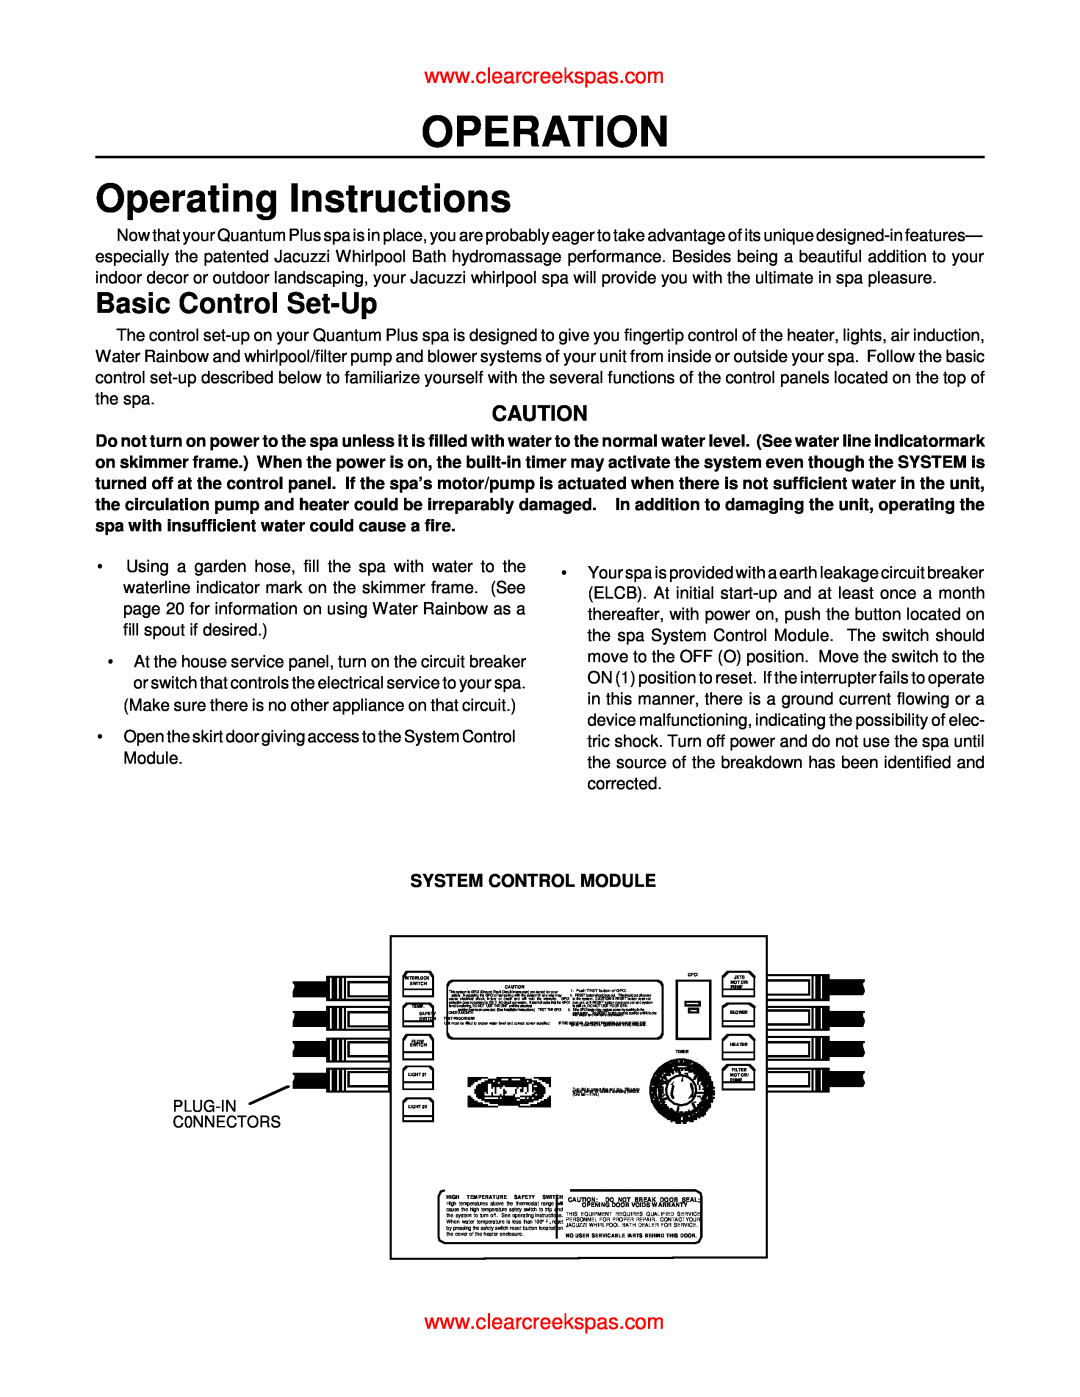 Whirlpool oortable spa owner manual Operation, Operating Instructions, Basic Control Set-Up, System Control Module 